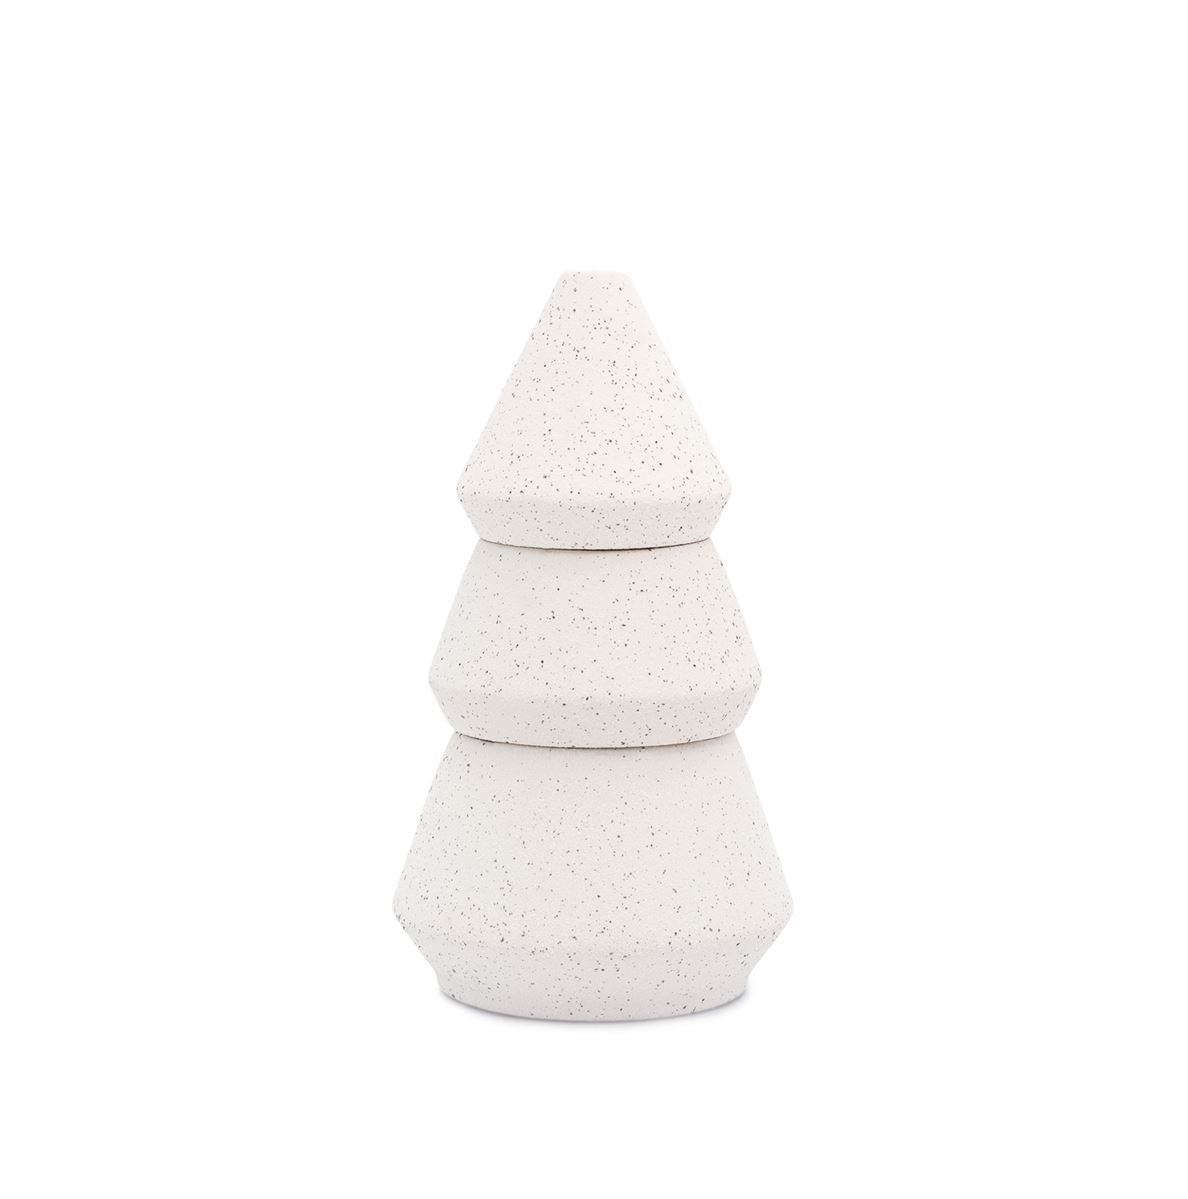 Cypress & Fir Speckled Textured Ceramic Tree Stack-Home Decor-Vixen Collection, Day Spa and Women's Boutique Located in Seattle, Washington